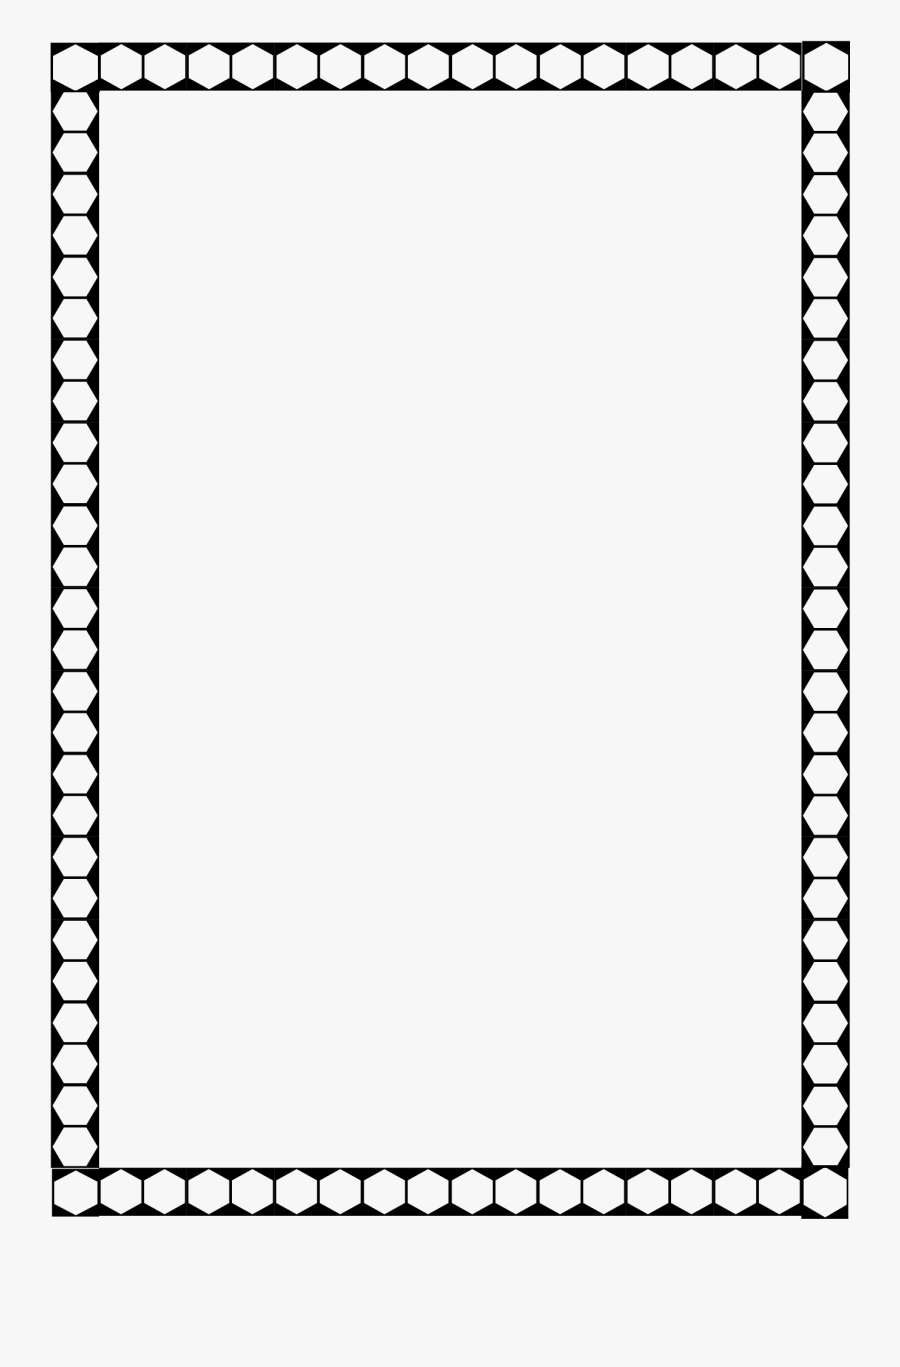 borders-for-a4-sheet-free-transparent-clipart-clipartkey